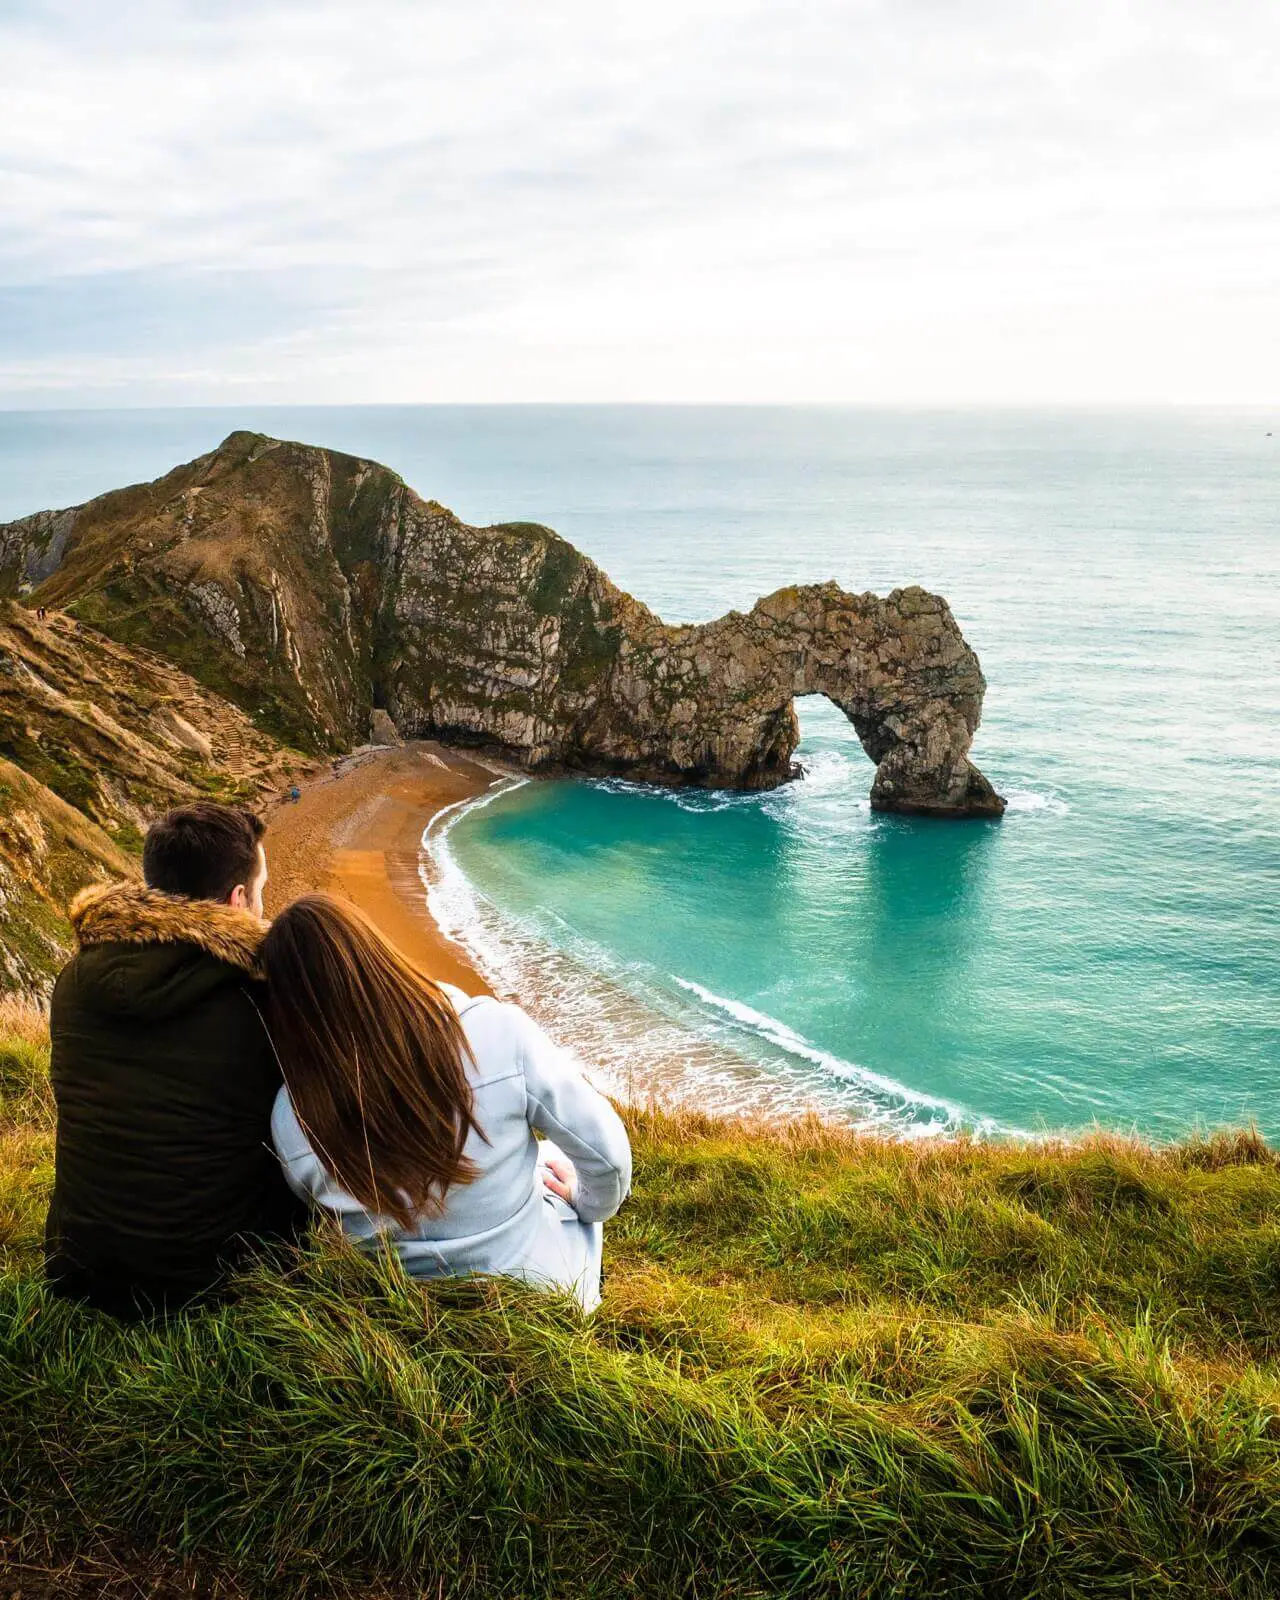 Durdle Door, South West, England - Tours from London